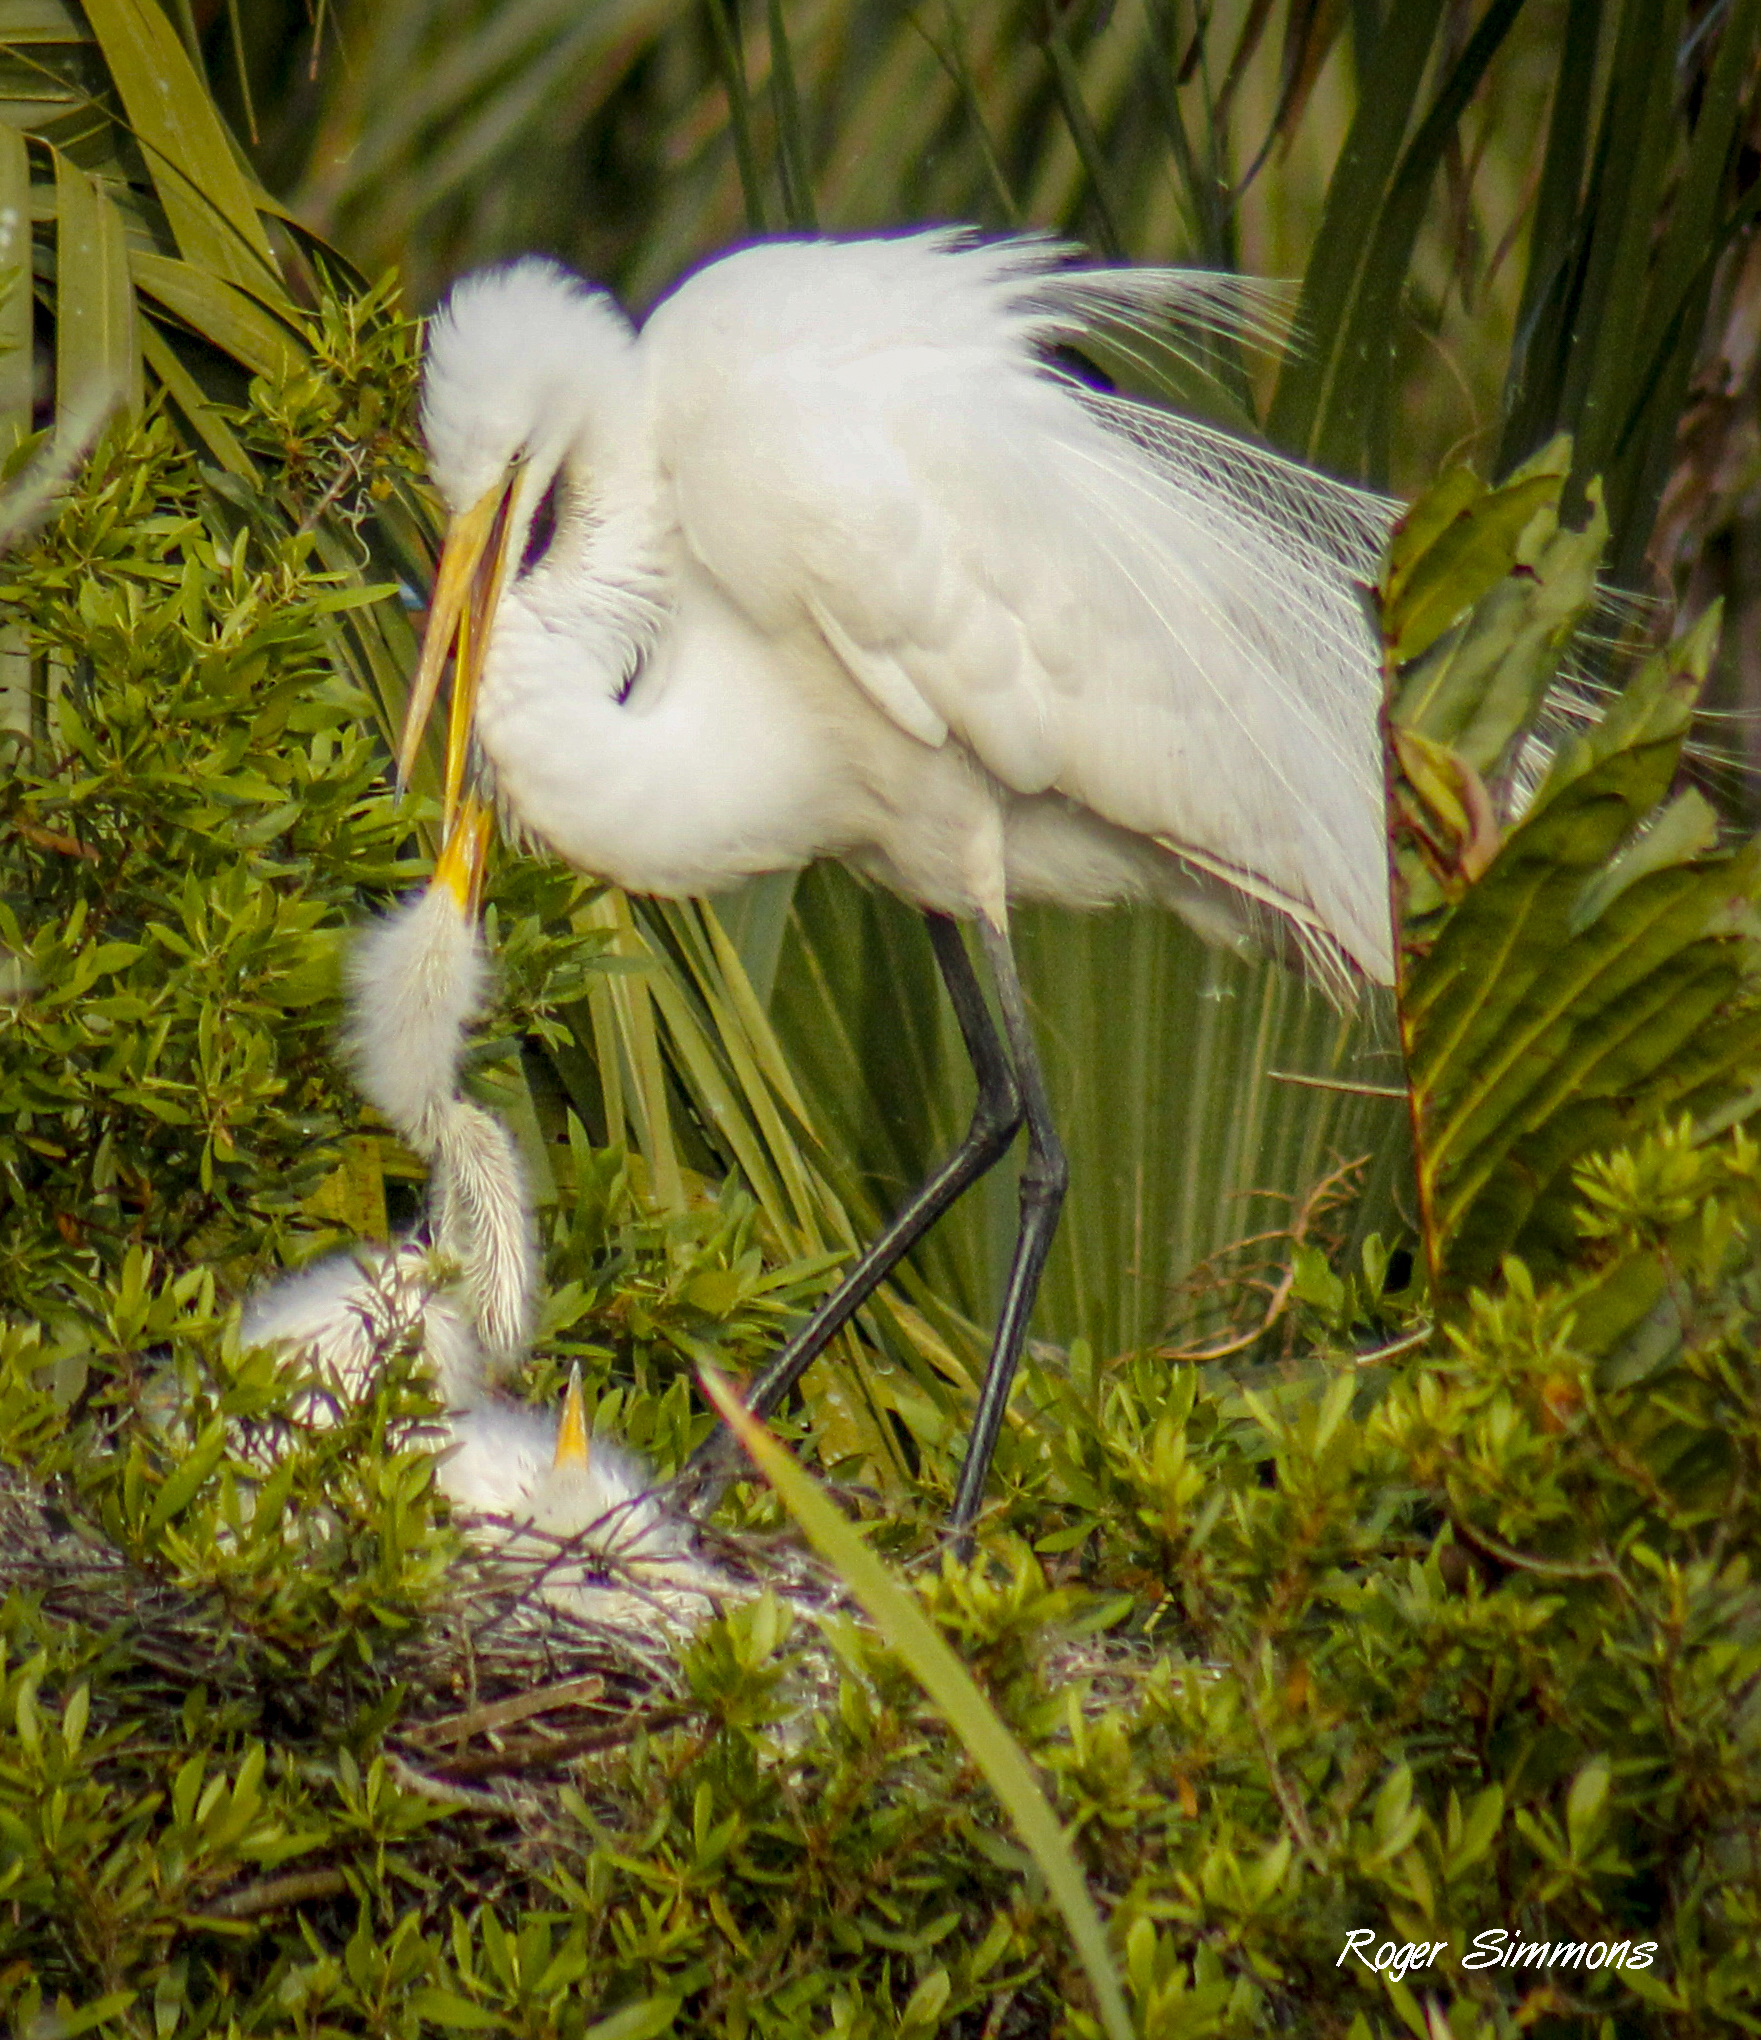 A Great Egret looks harried as she attends to the babies in her nest at Orlando Wetlands Park.